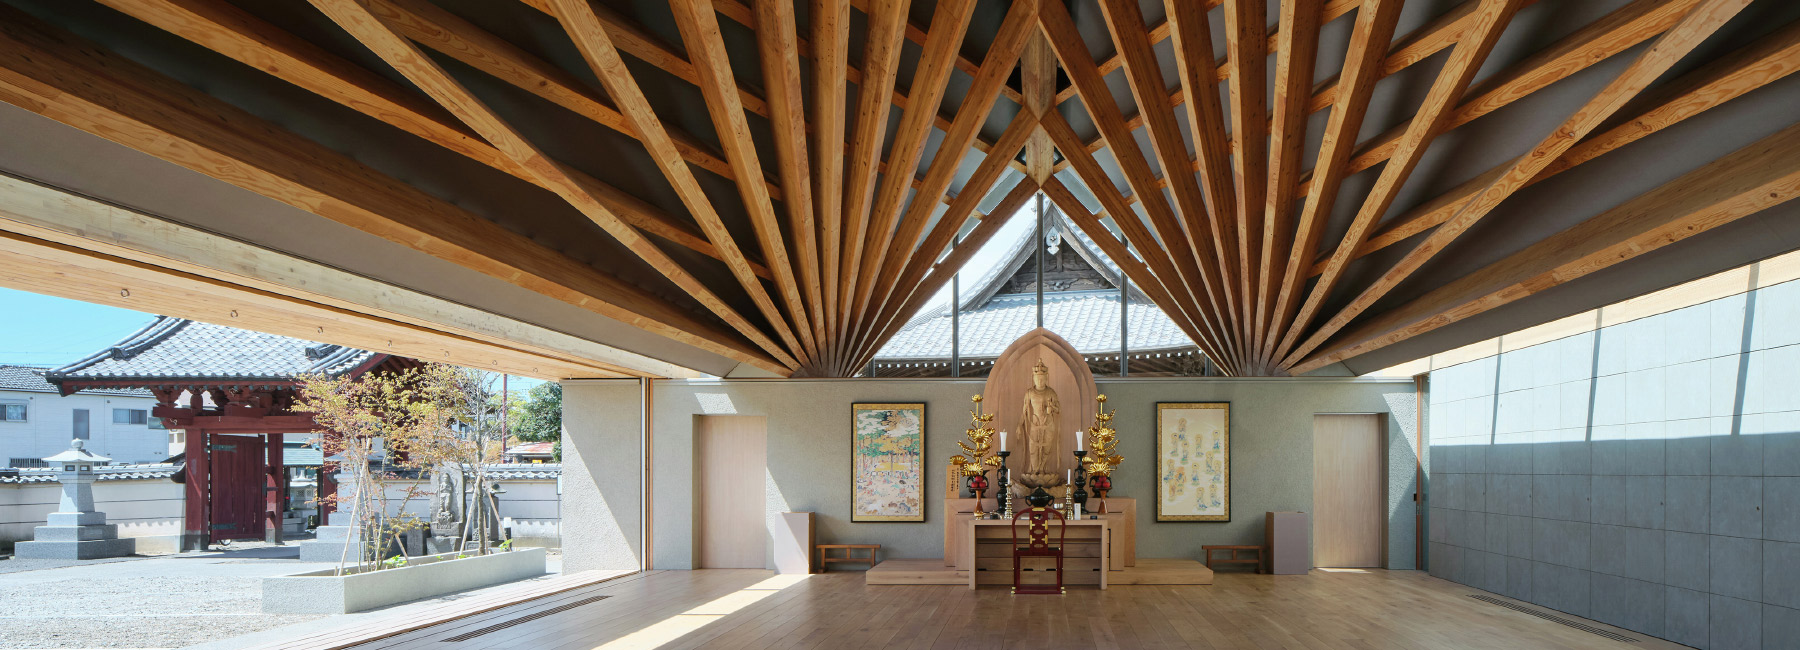 japanese temple roof